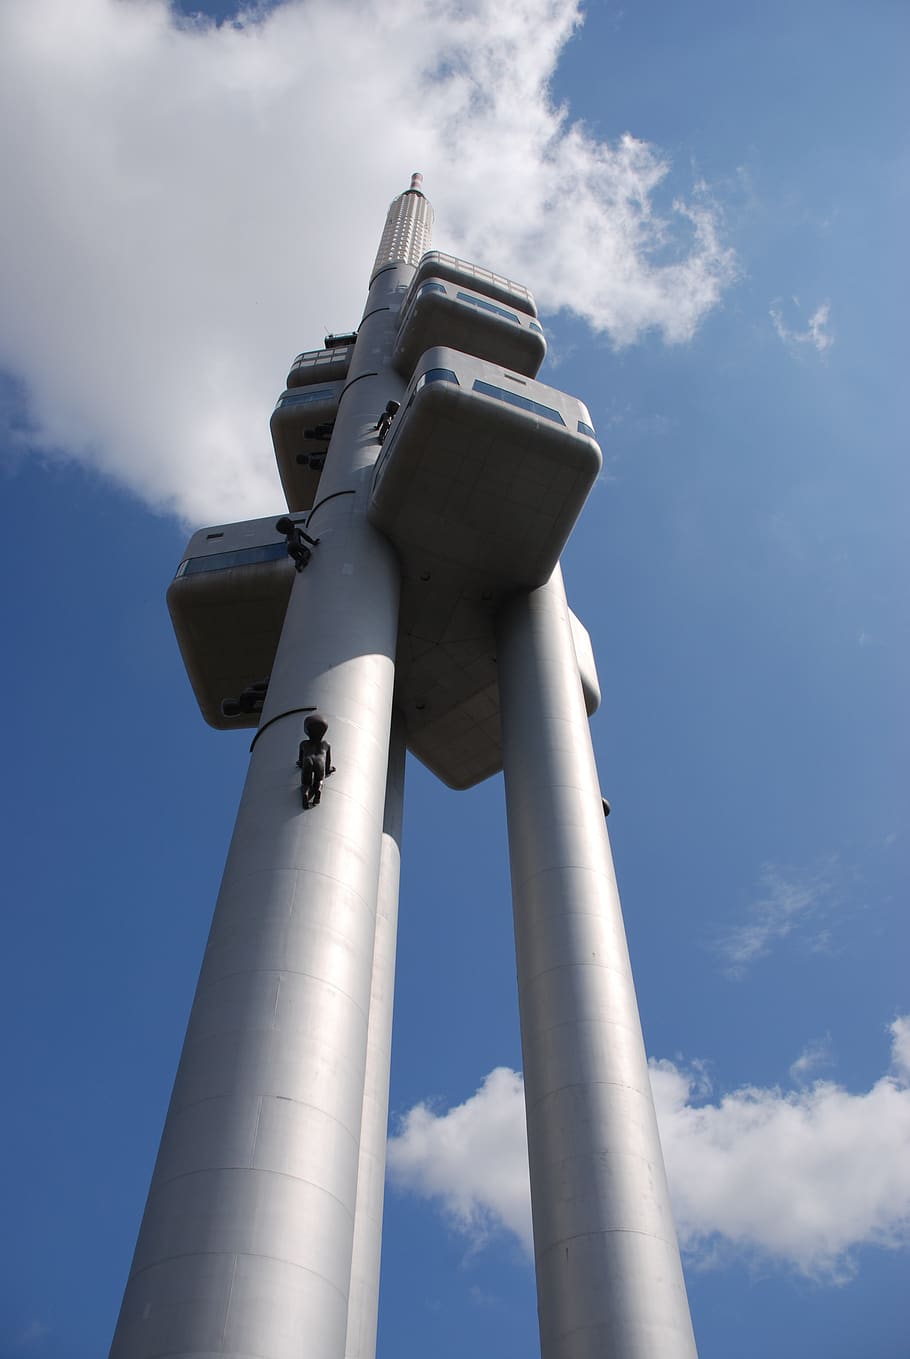 prague, tower, tv, television tower, baby, crawling, pole, low angle view, sky, cloud - sky